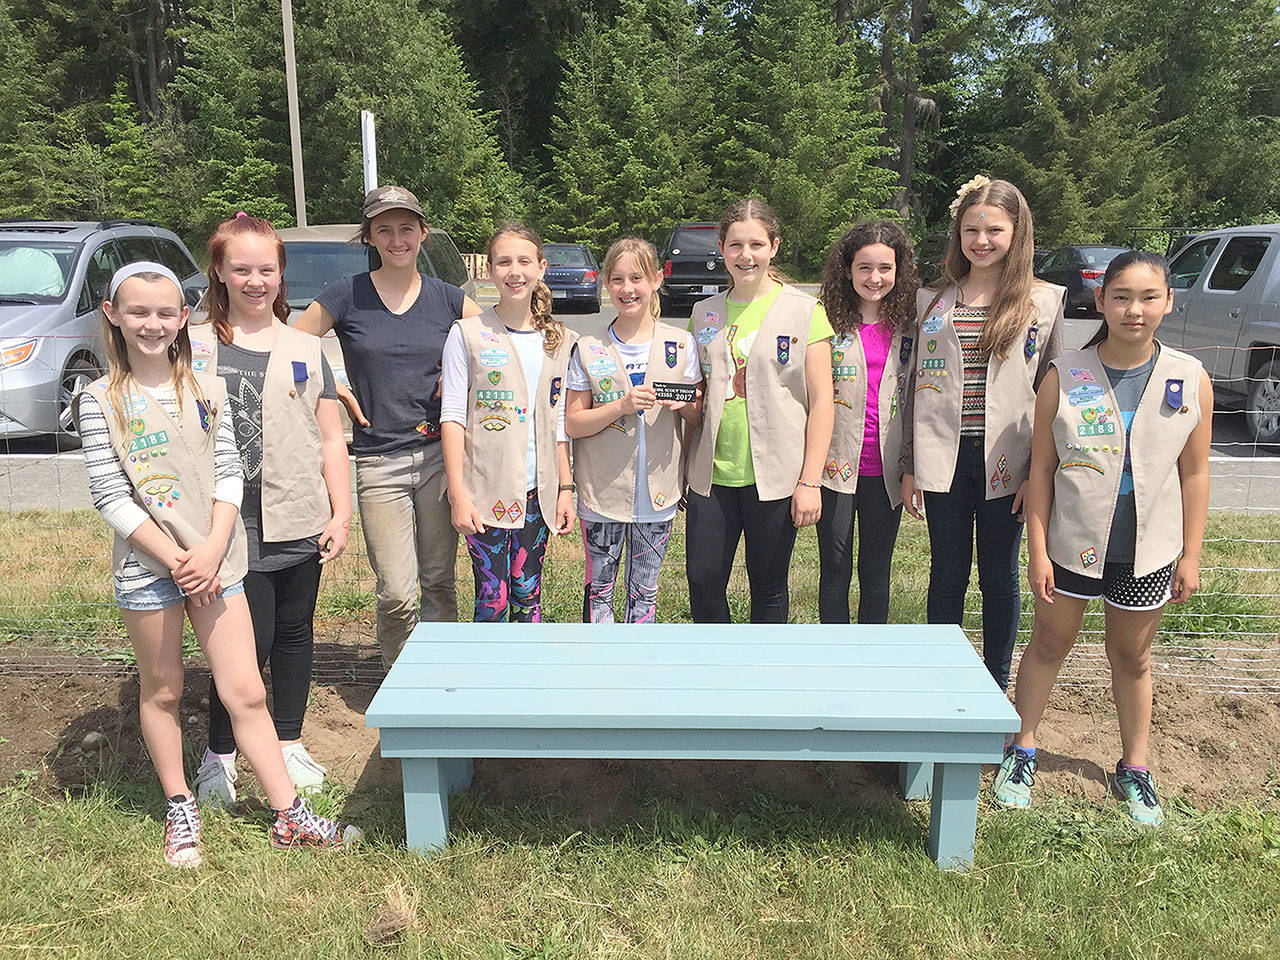 Evan Thompson / The Record — Cadette Girl Scout Troop 42183 donated a bench they made to South Whidbey High School’s garden. From left to right: Freja Heggenes, Phoebe Hawkins, garden coordinator Raelani Kessler, Abigail Ireland, Parker Forsyth, Emma Callahan, Eva Wirth, Taryn Henny, and Chloe Goethel.